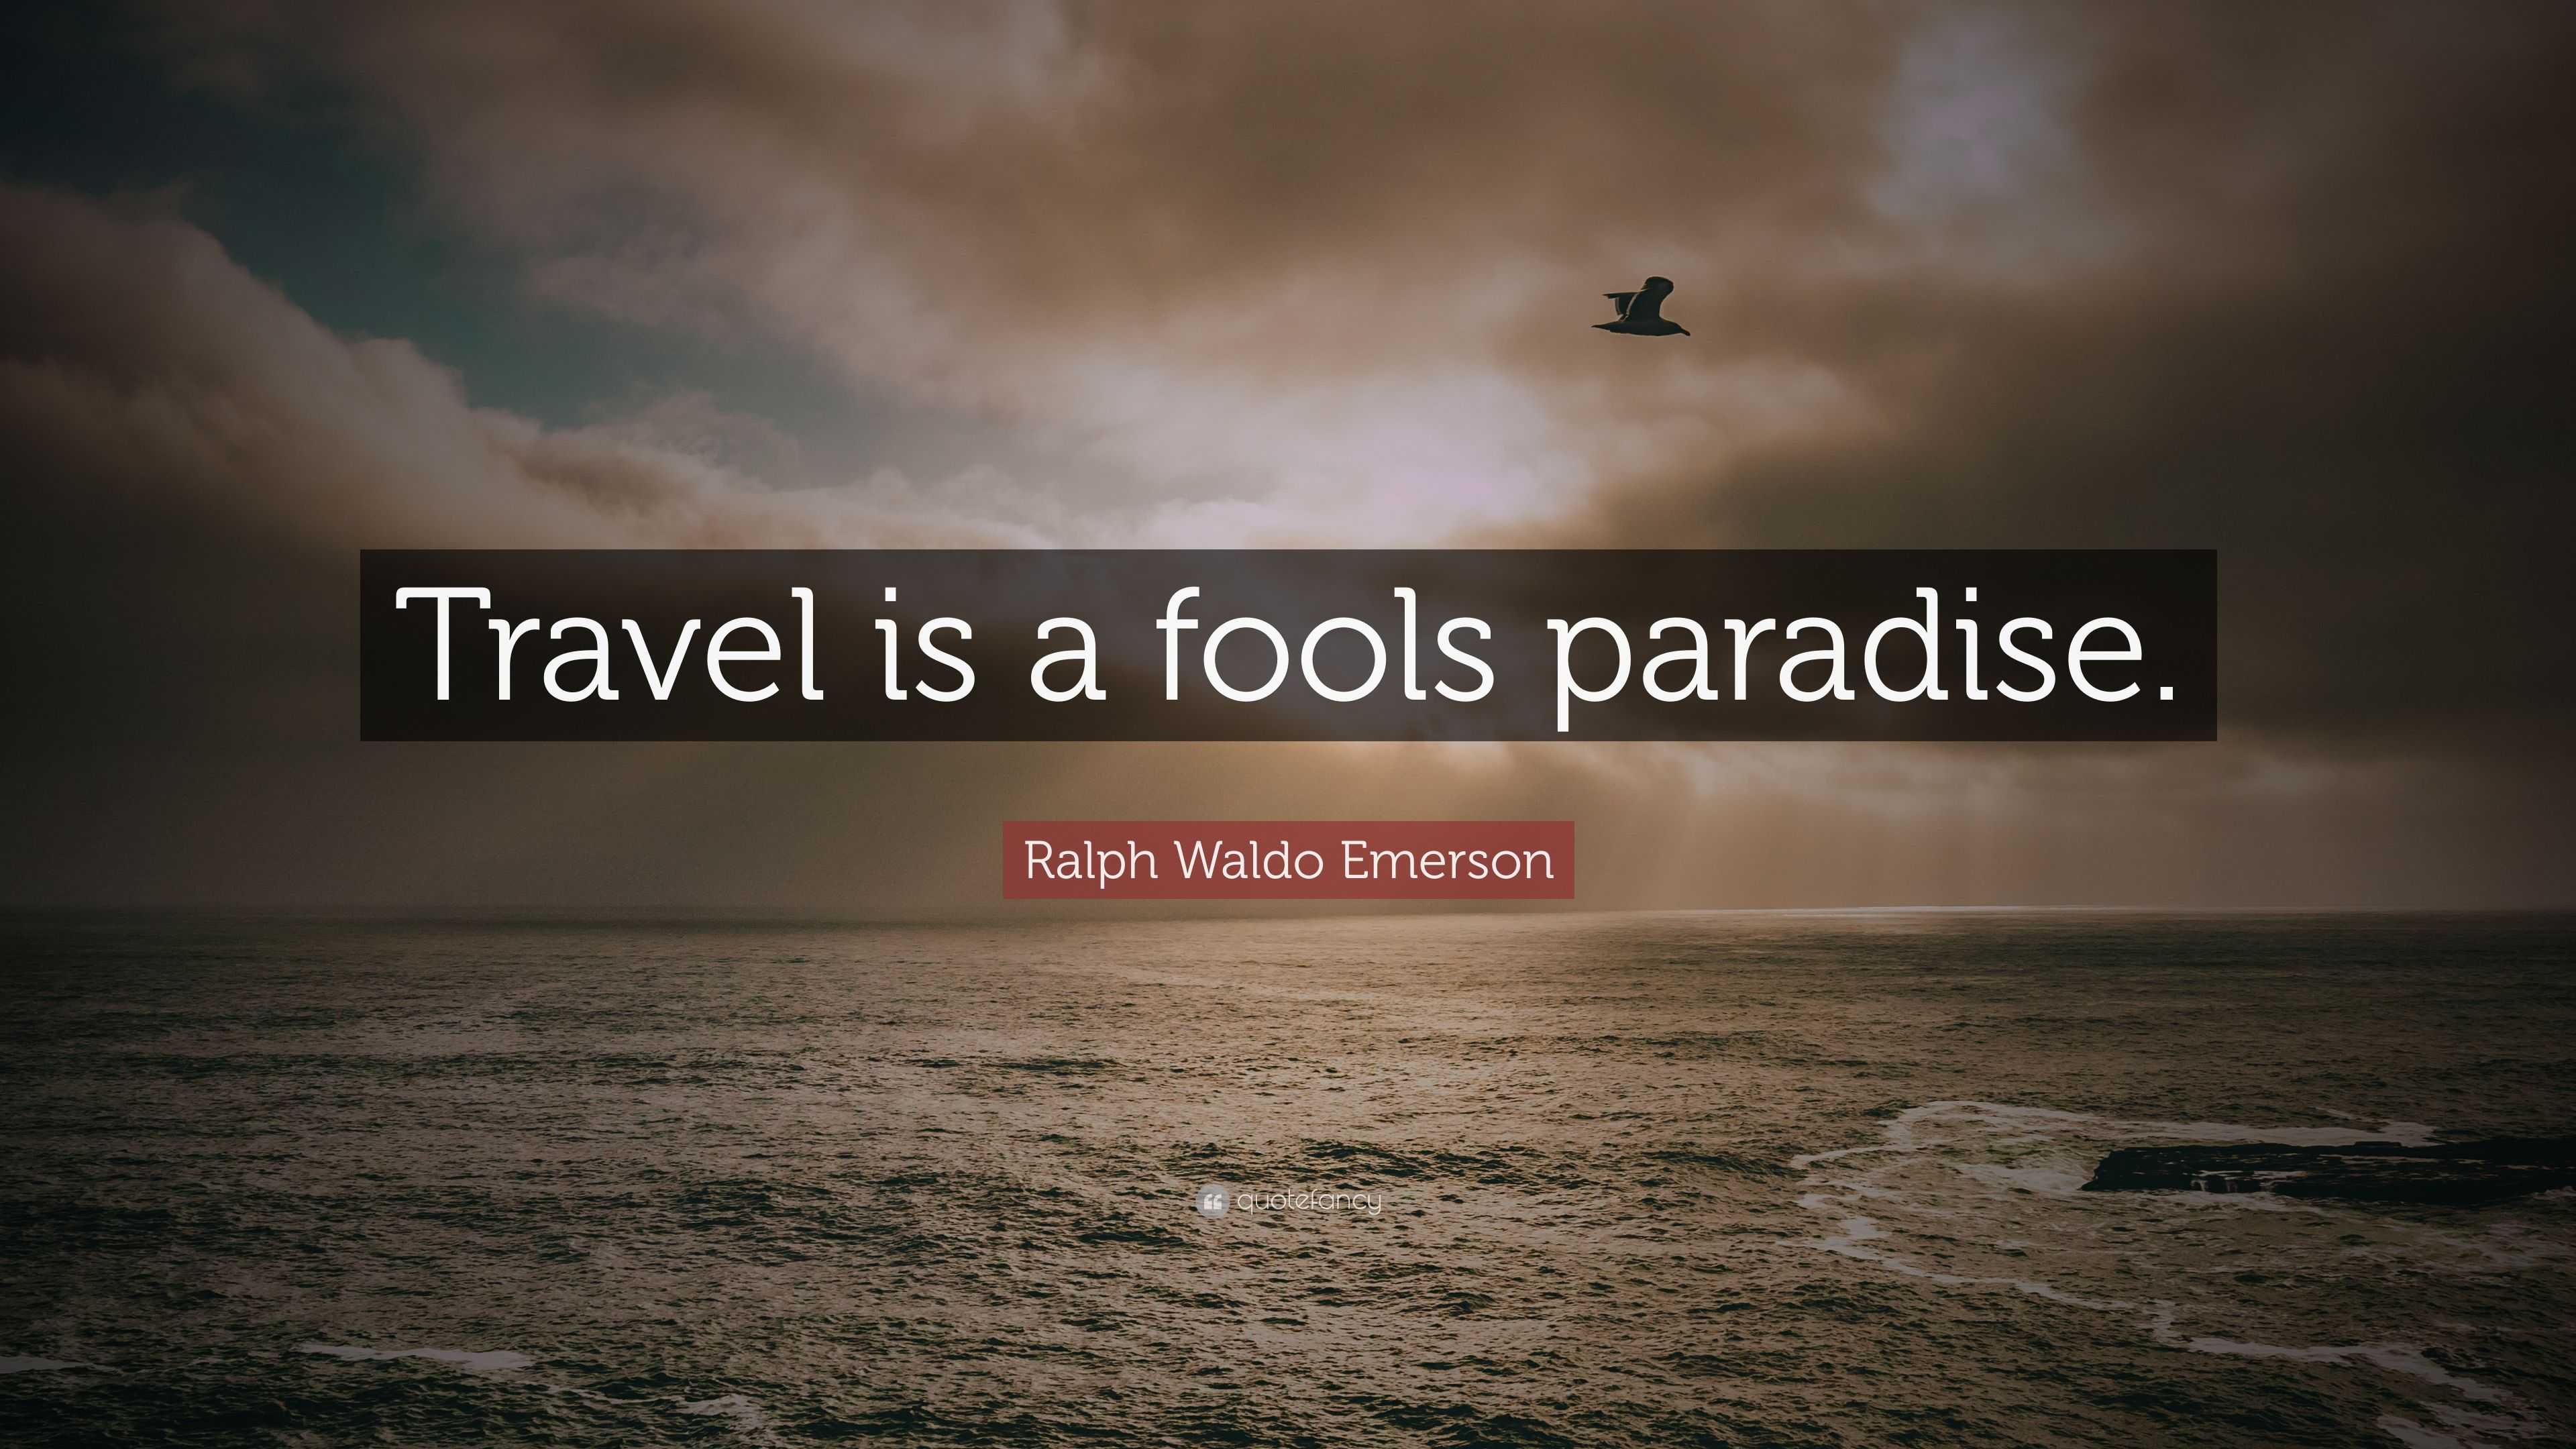 travel is a fool's paradise